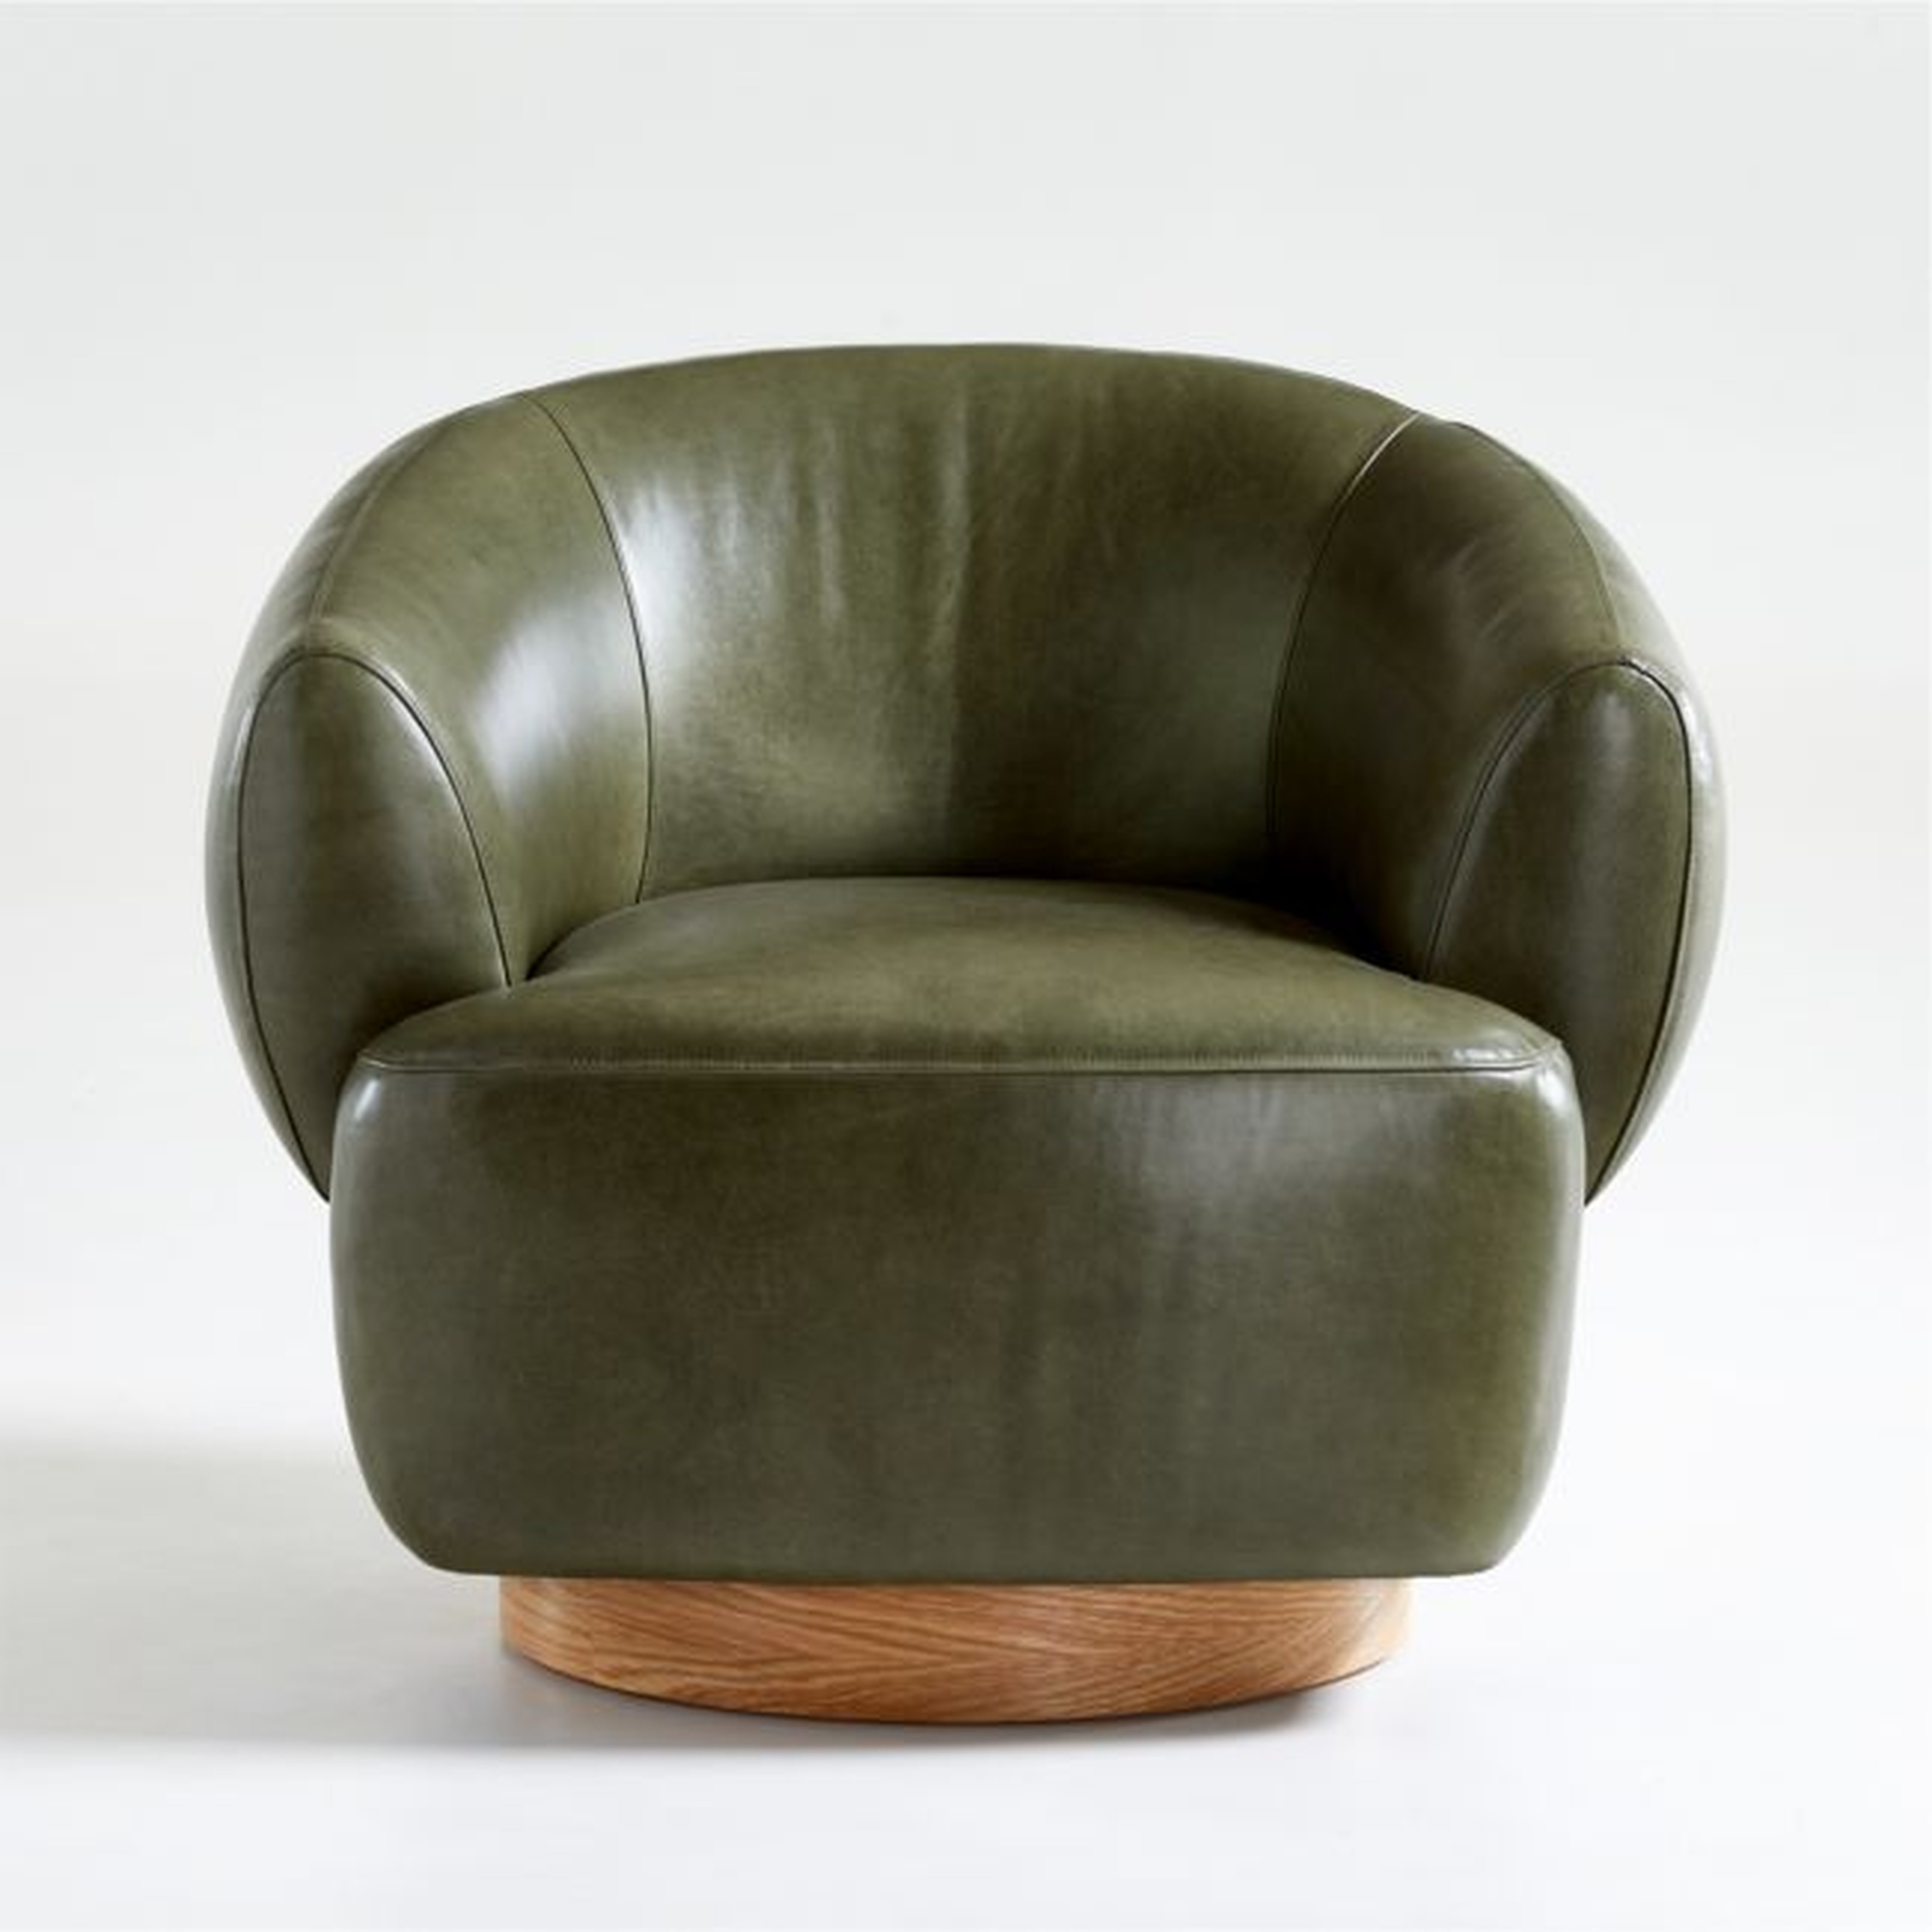 Merrick Leather Swivel Chair - Crate and Barrel